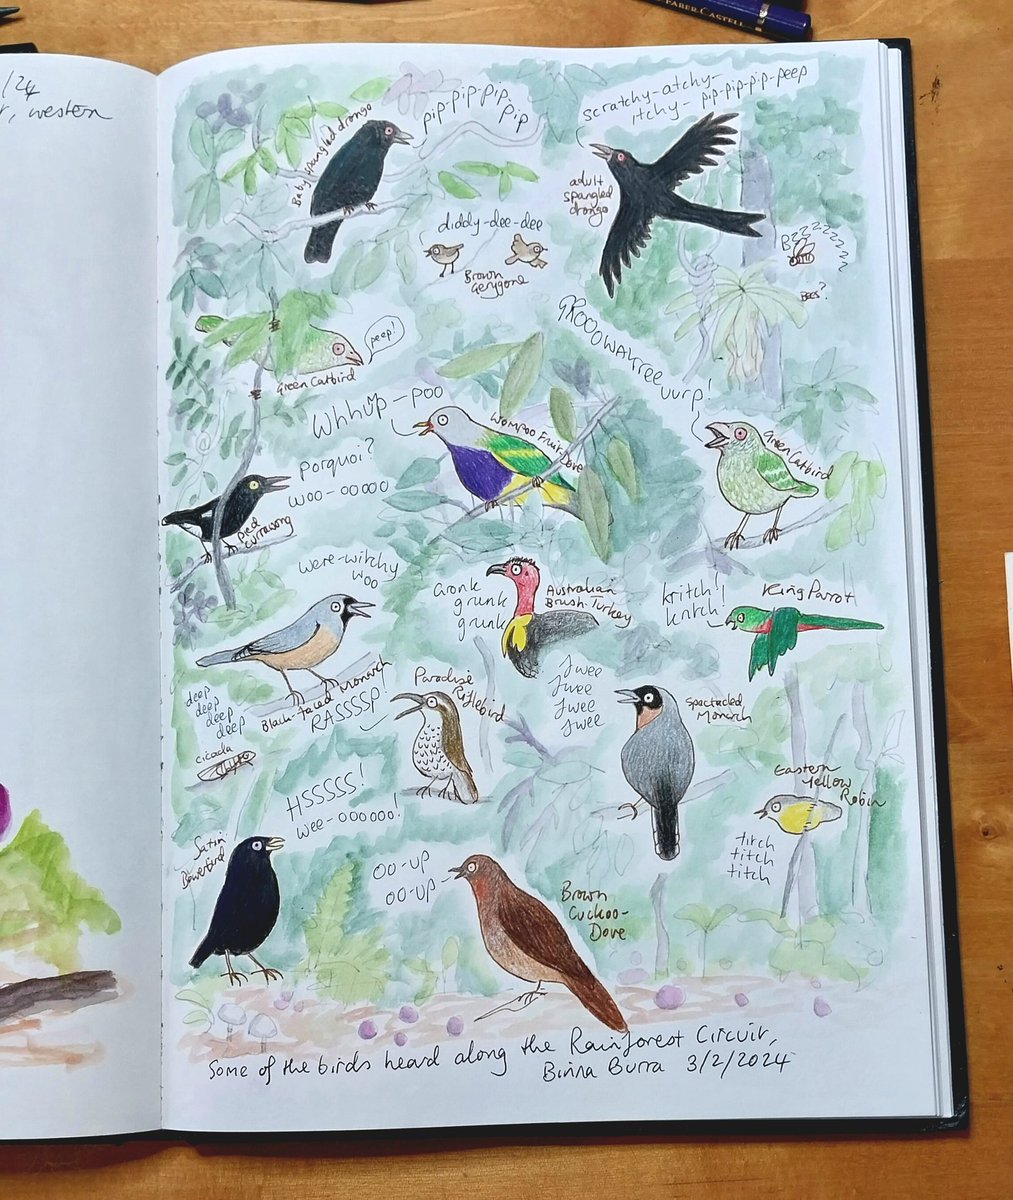 Some of the birds I heard in the rainforest yesterday
#naturejournal #birds